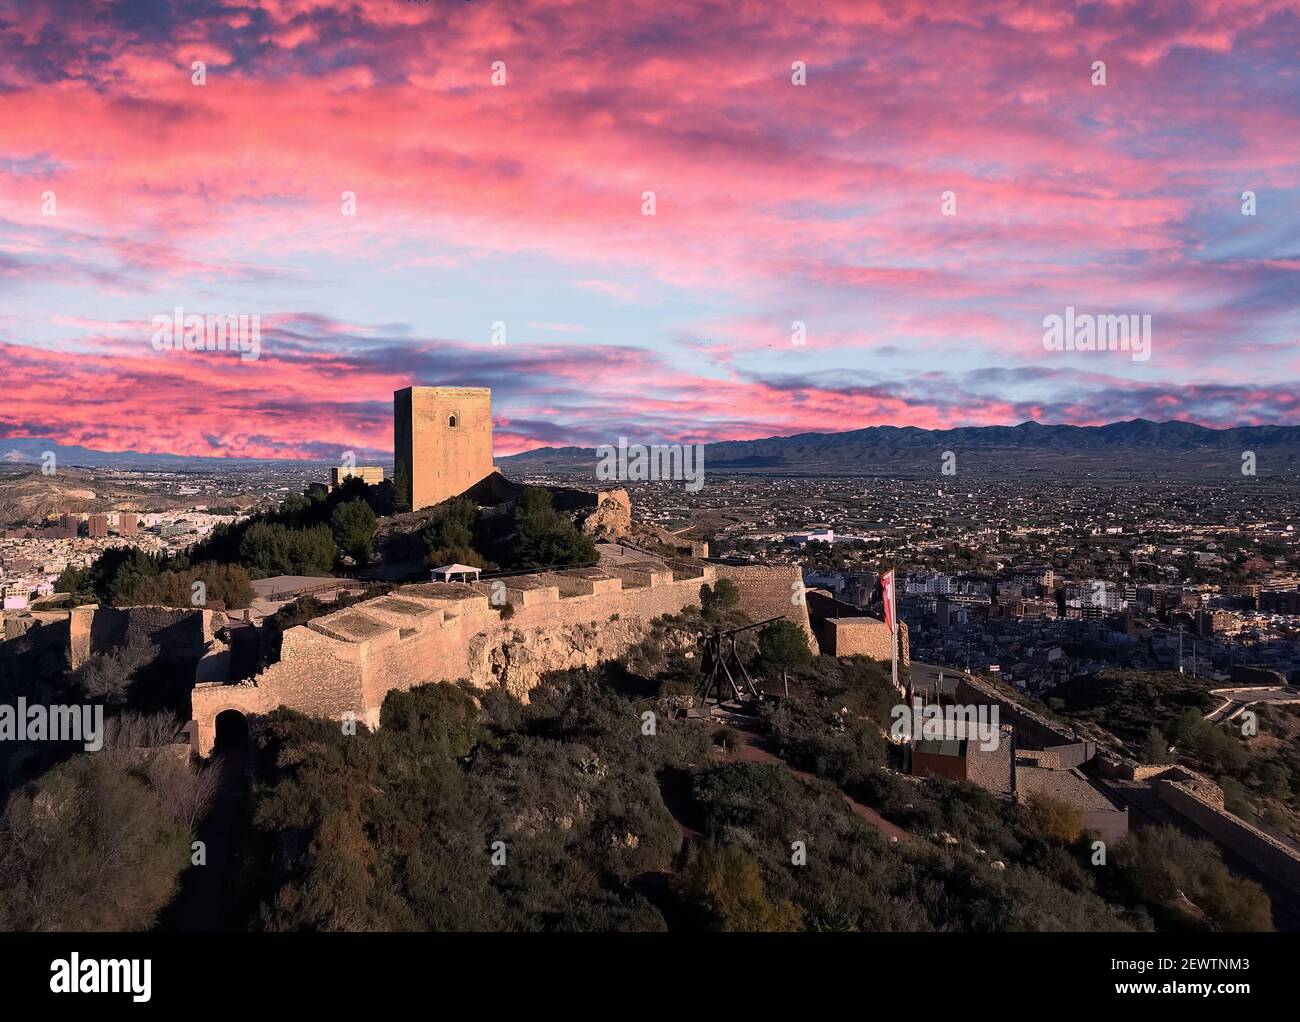 Castle of Lorca in Lorca, Murcia, Spain, is a fortress of medieval origin constructed between the 9th and 15th centuries. Stock Photo